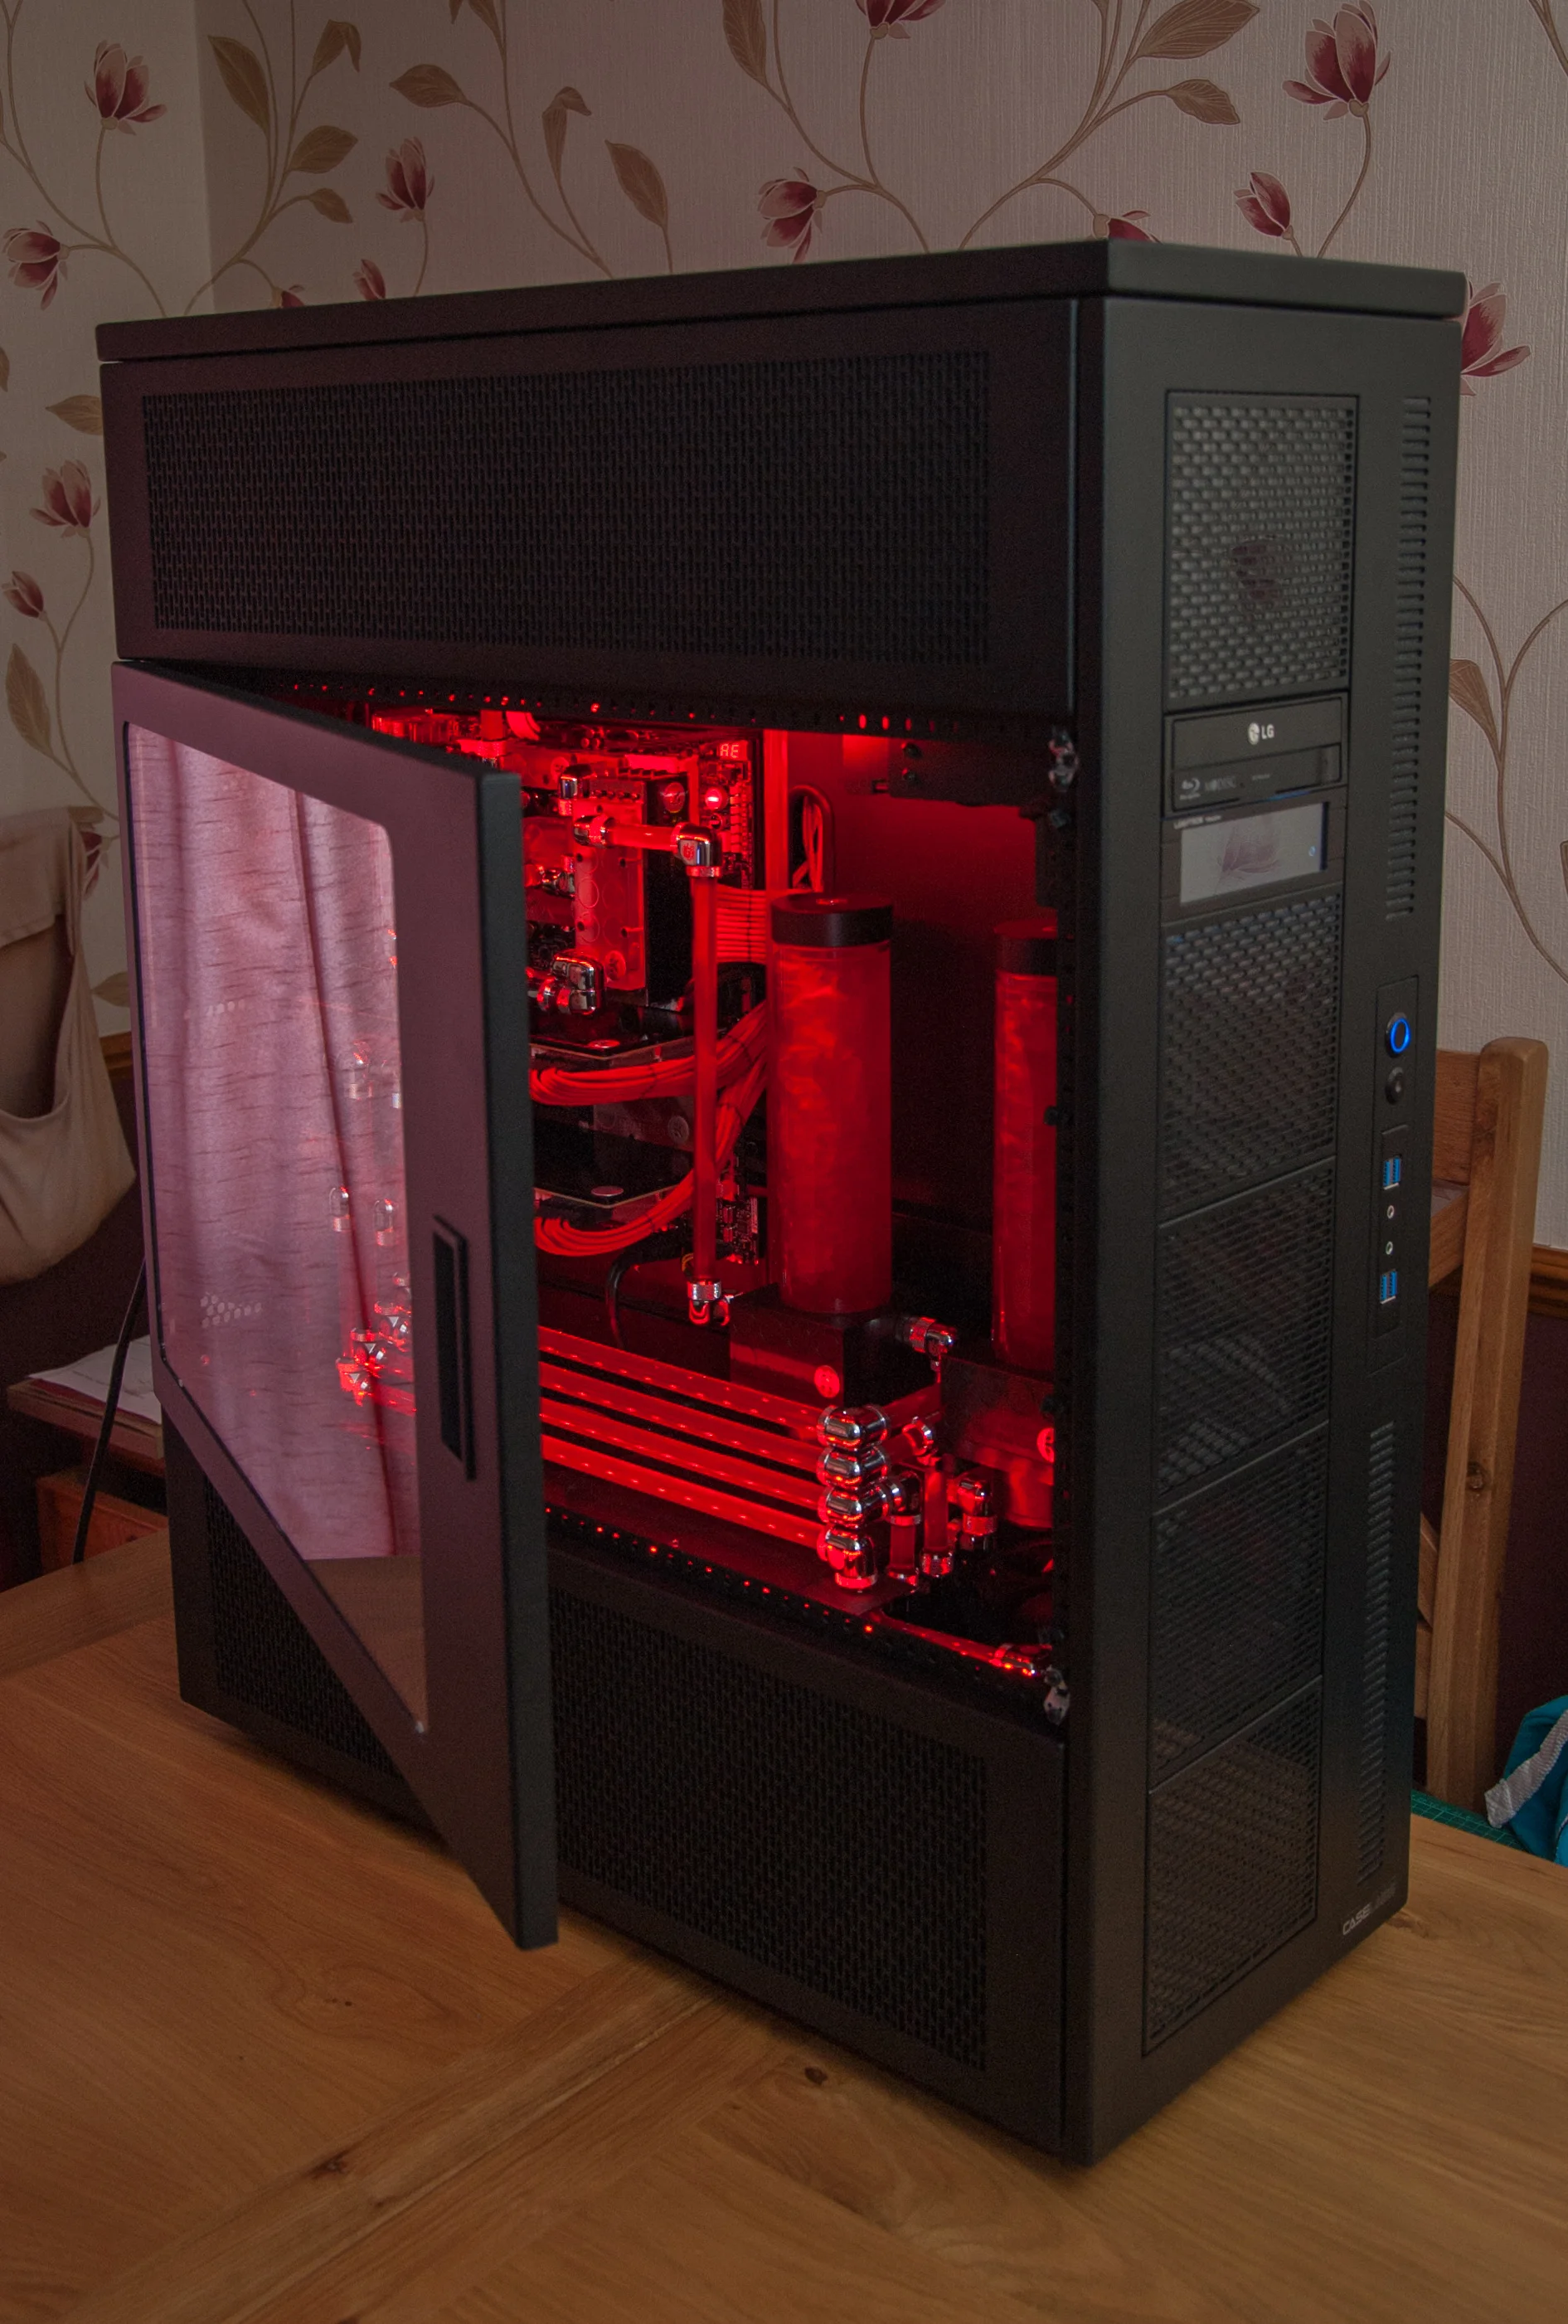 More finished Build photos 7